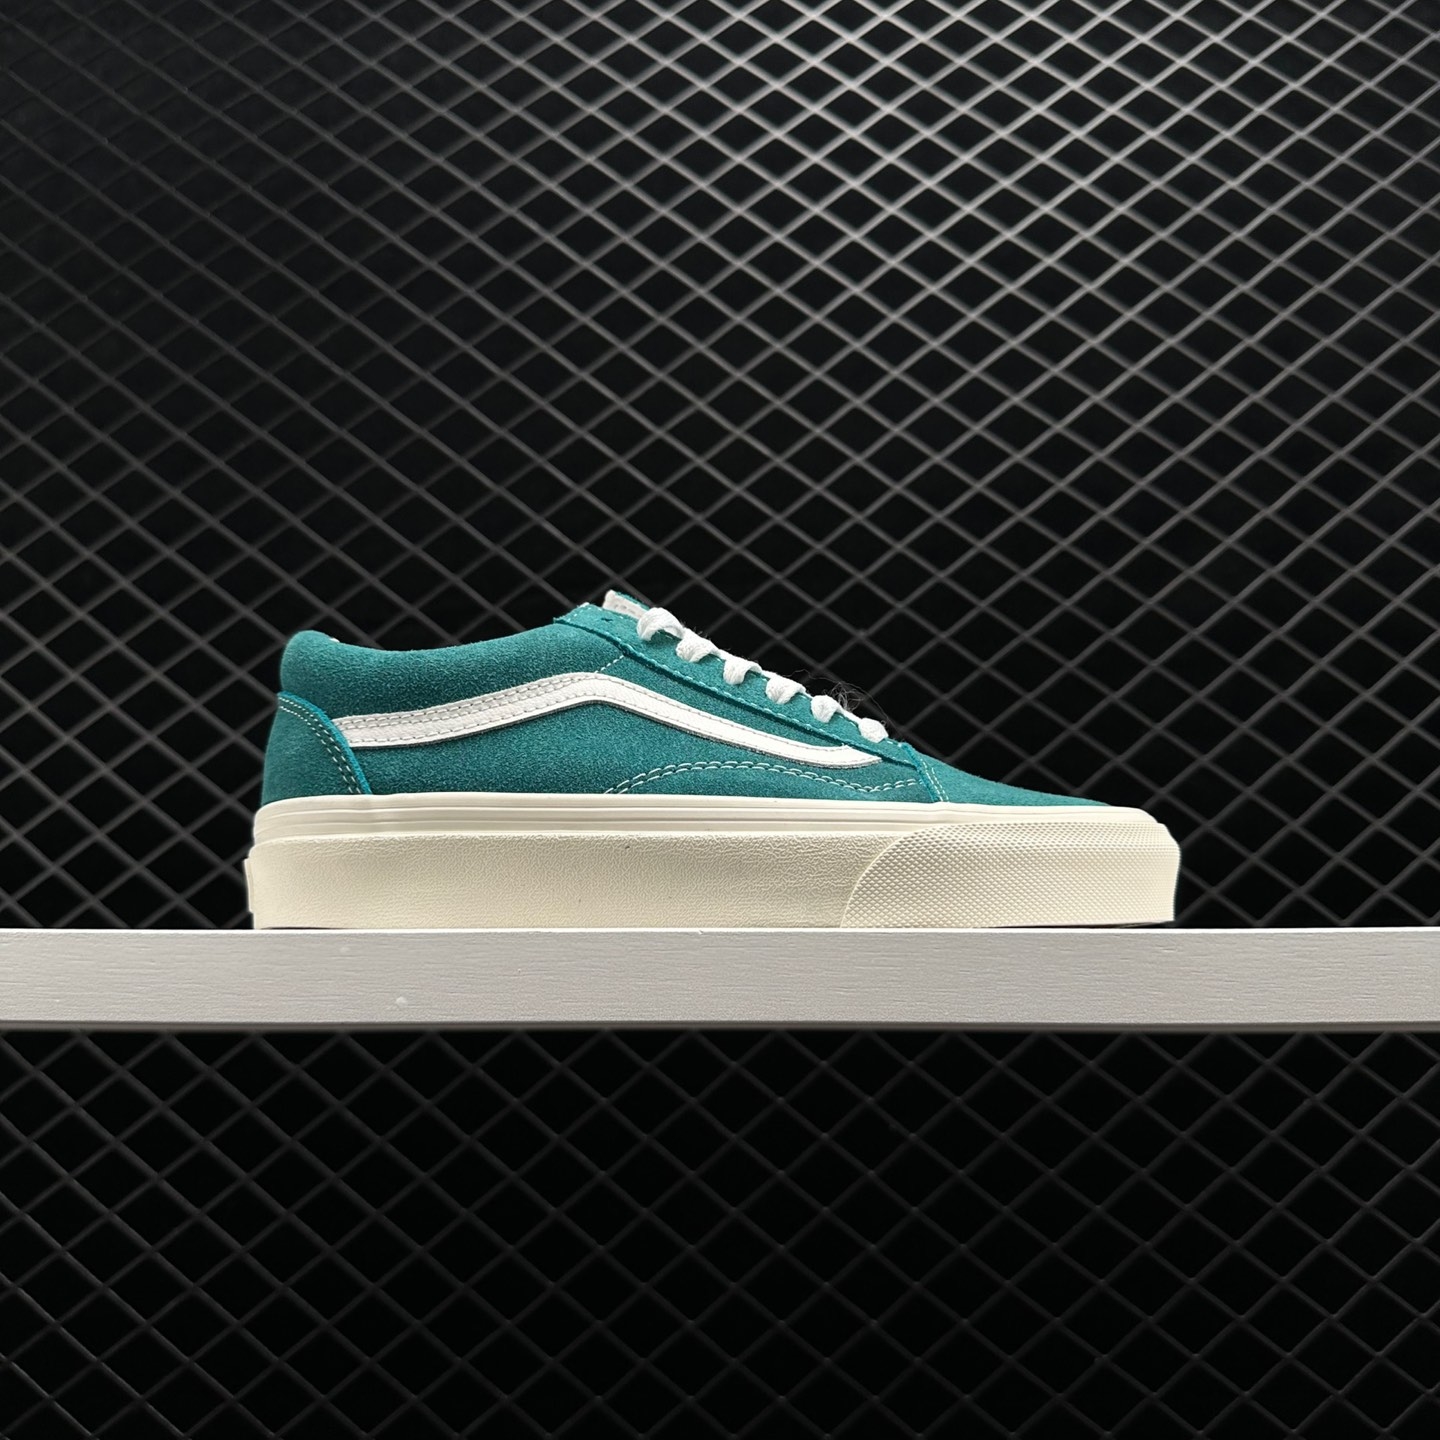 Vans Style 36 Retro Sport Green - Limited Edition Sneakers